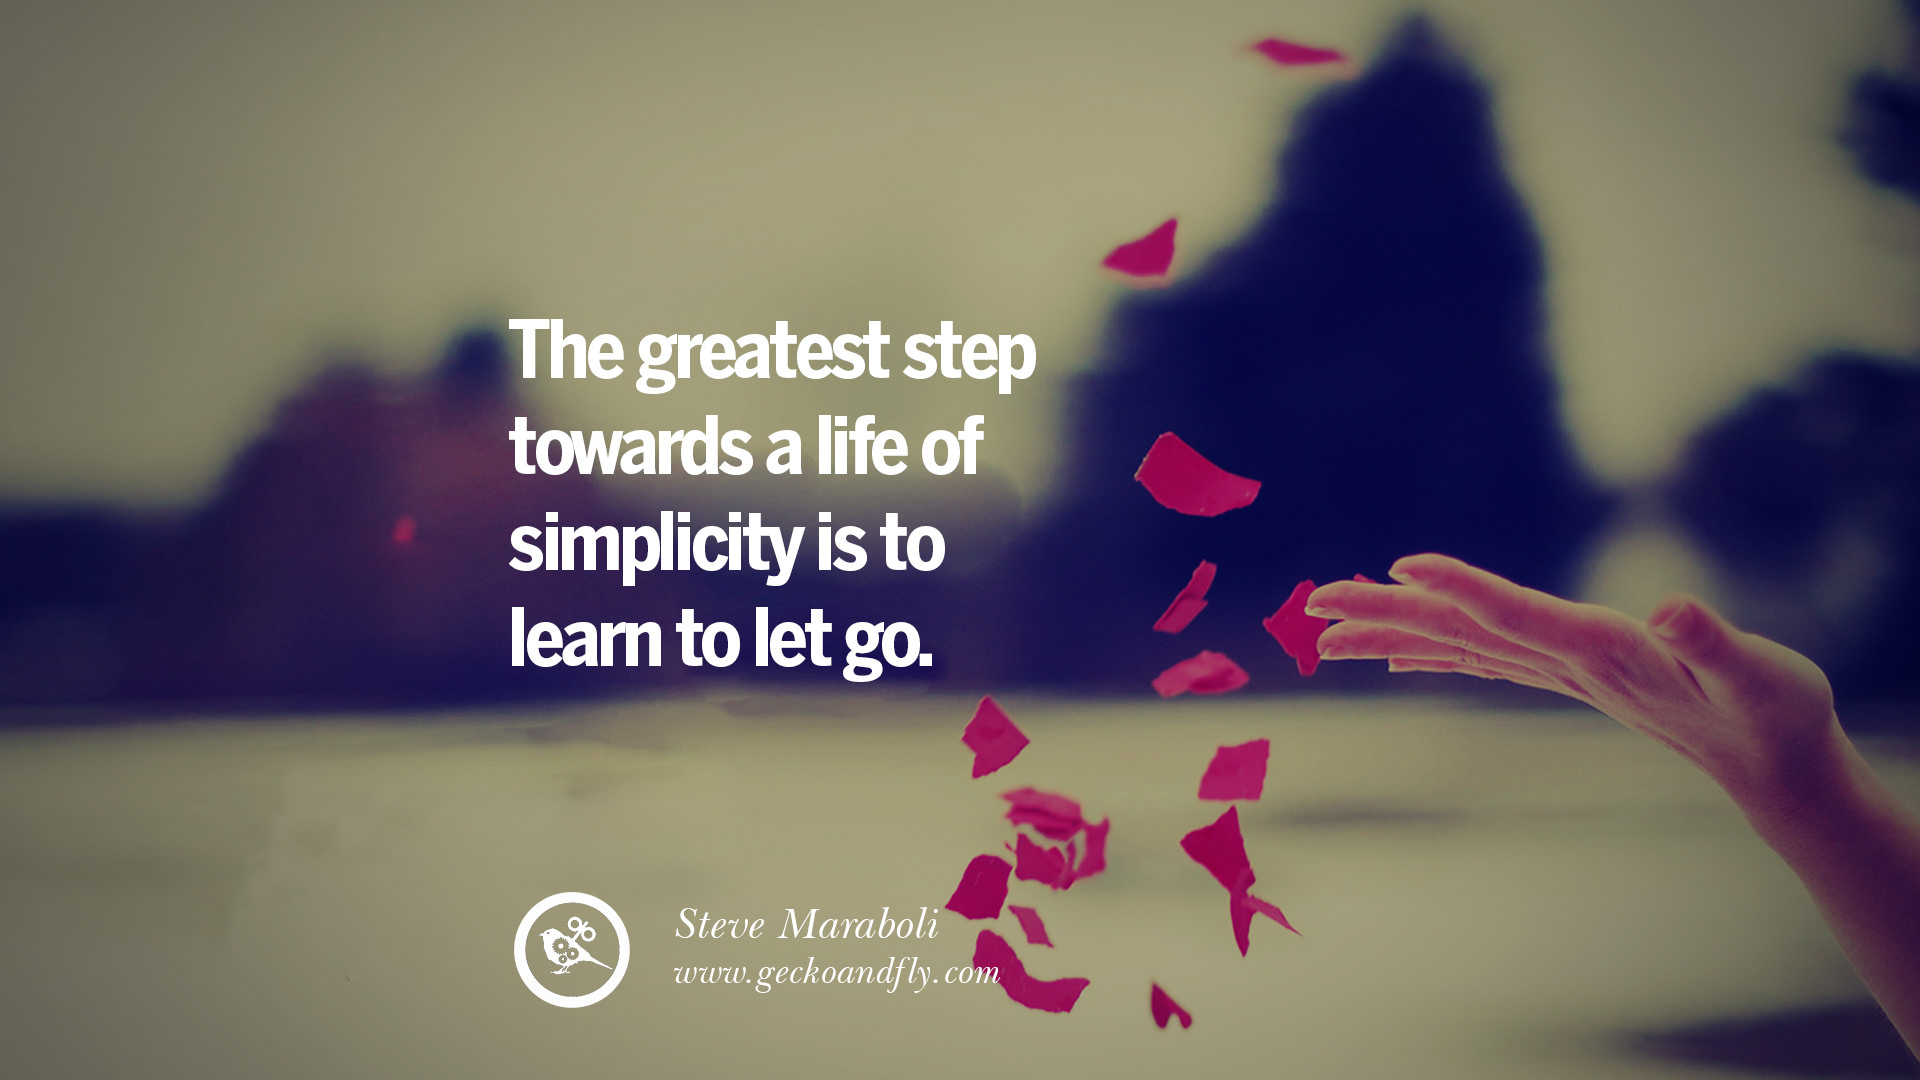 moving on letting go quotes39